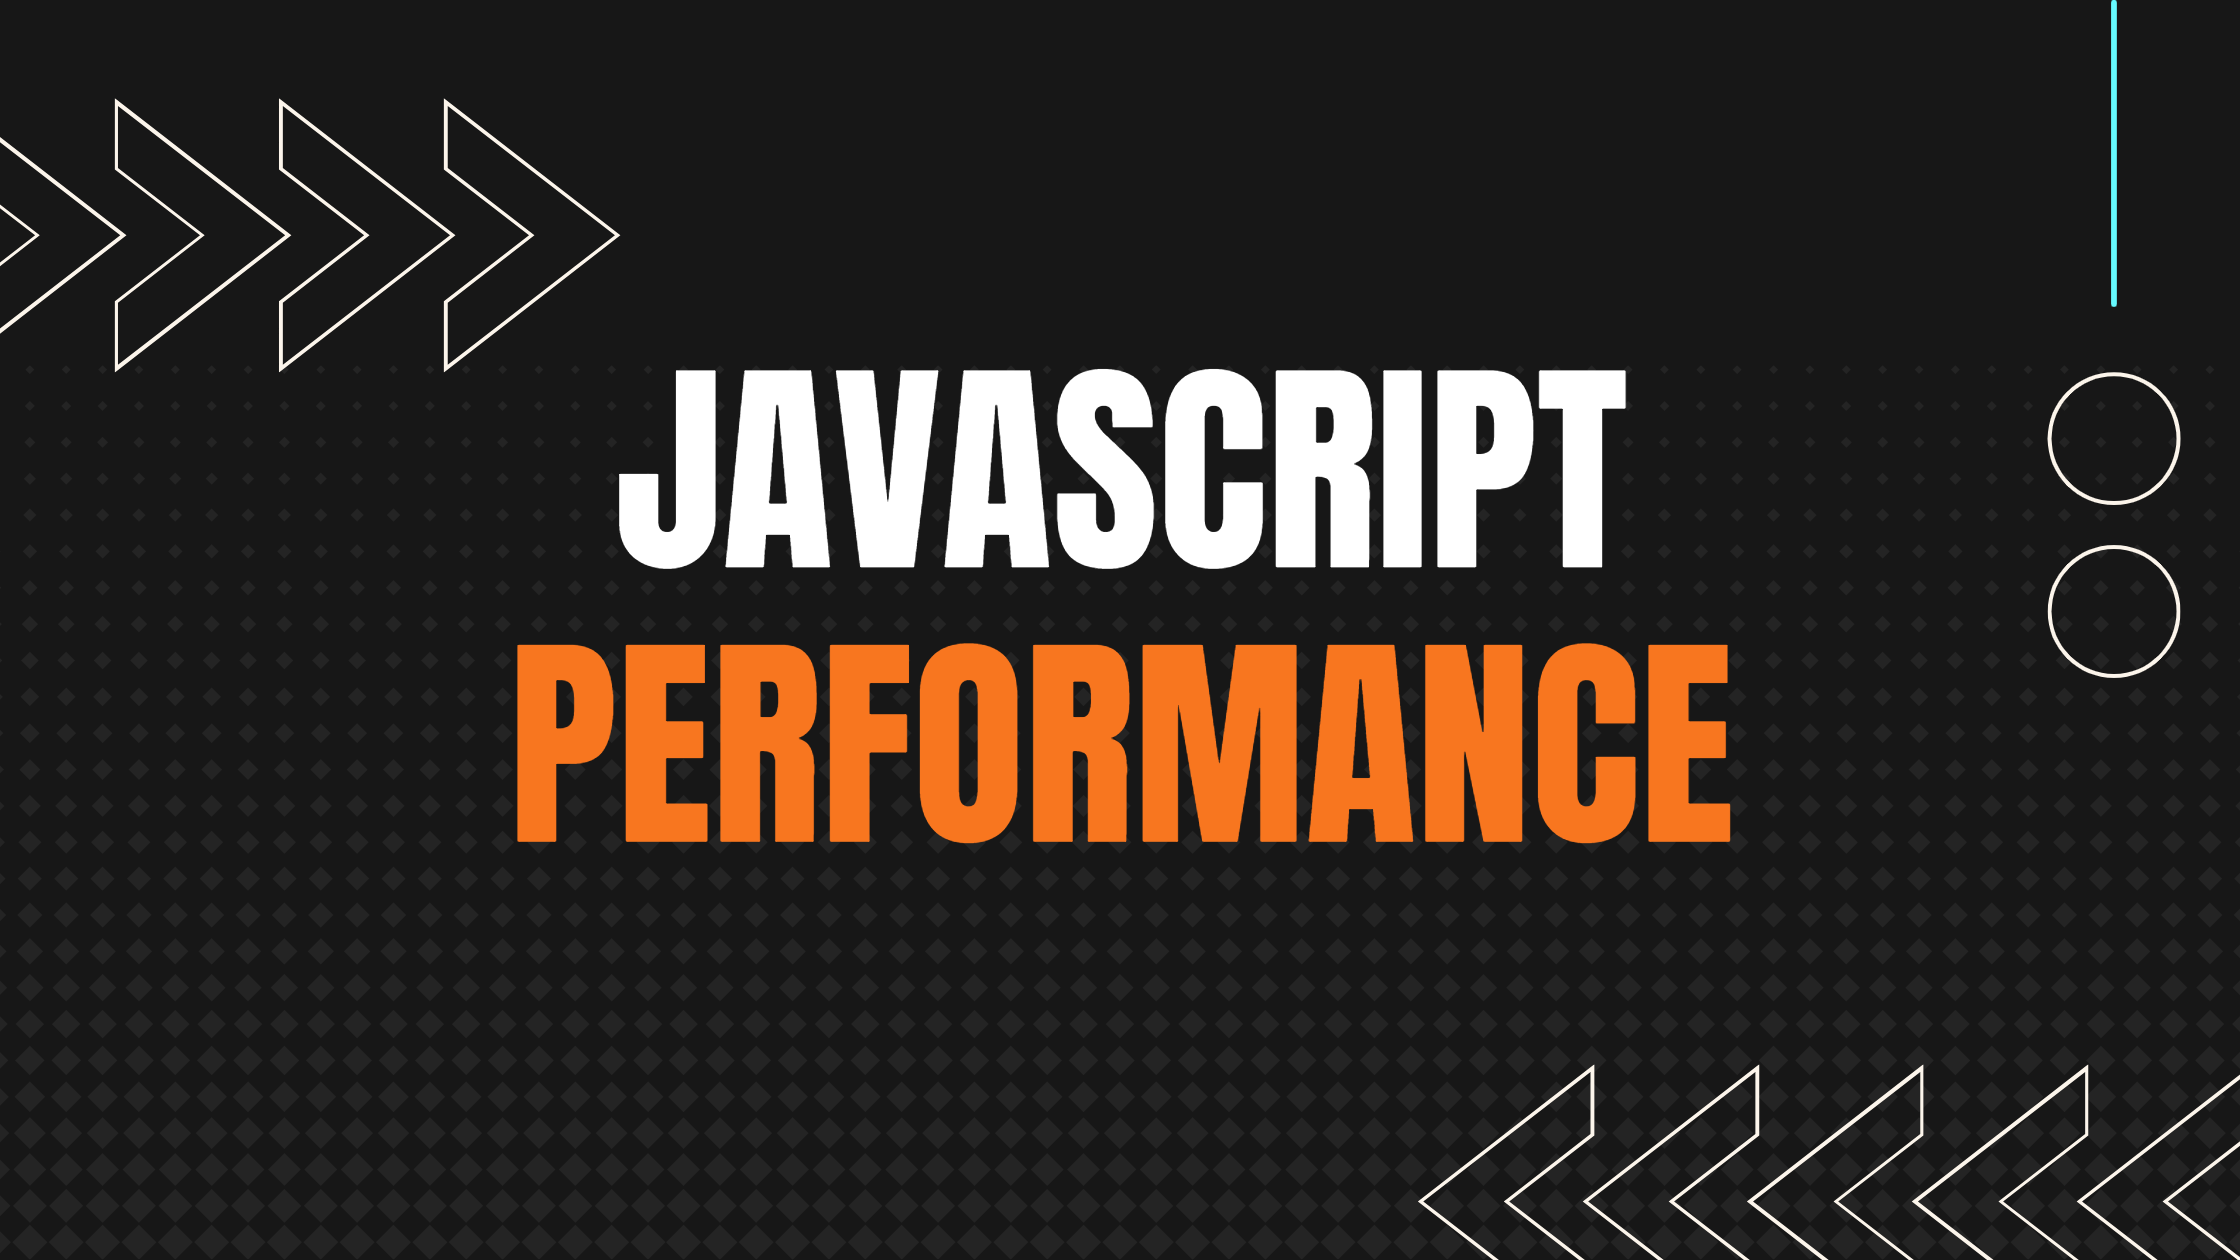 Taking a look at jQuery's performance